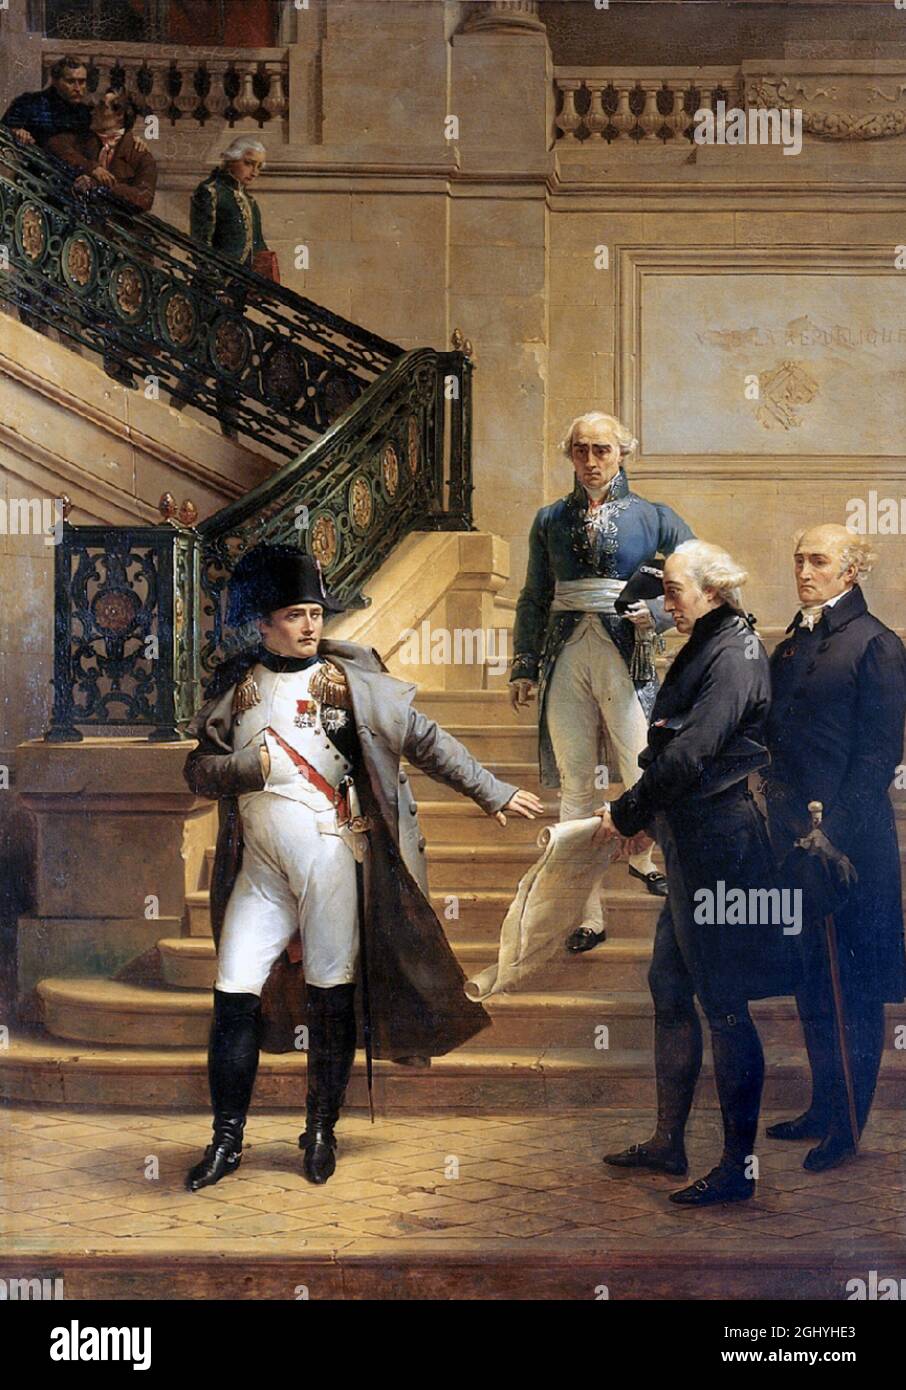 Napoleon's visit to the Palais-Royal on 19 August 1807, the Palais-Royal where the Tribunat, a consultative assembly that had just been abolished, was sitting. The man in the blue suit was Jean-Claude Fabre, known as Fabre de l'Aude, the president of the Tribunate. Napoleon, angry at his presence, left the palace, rejecting the plans proposed by the two architects on the right Stock Photo